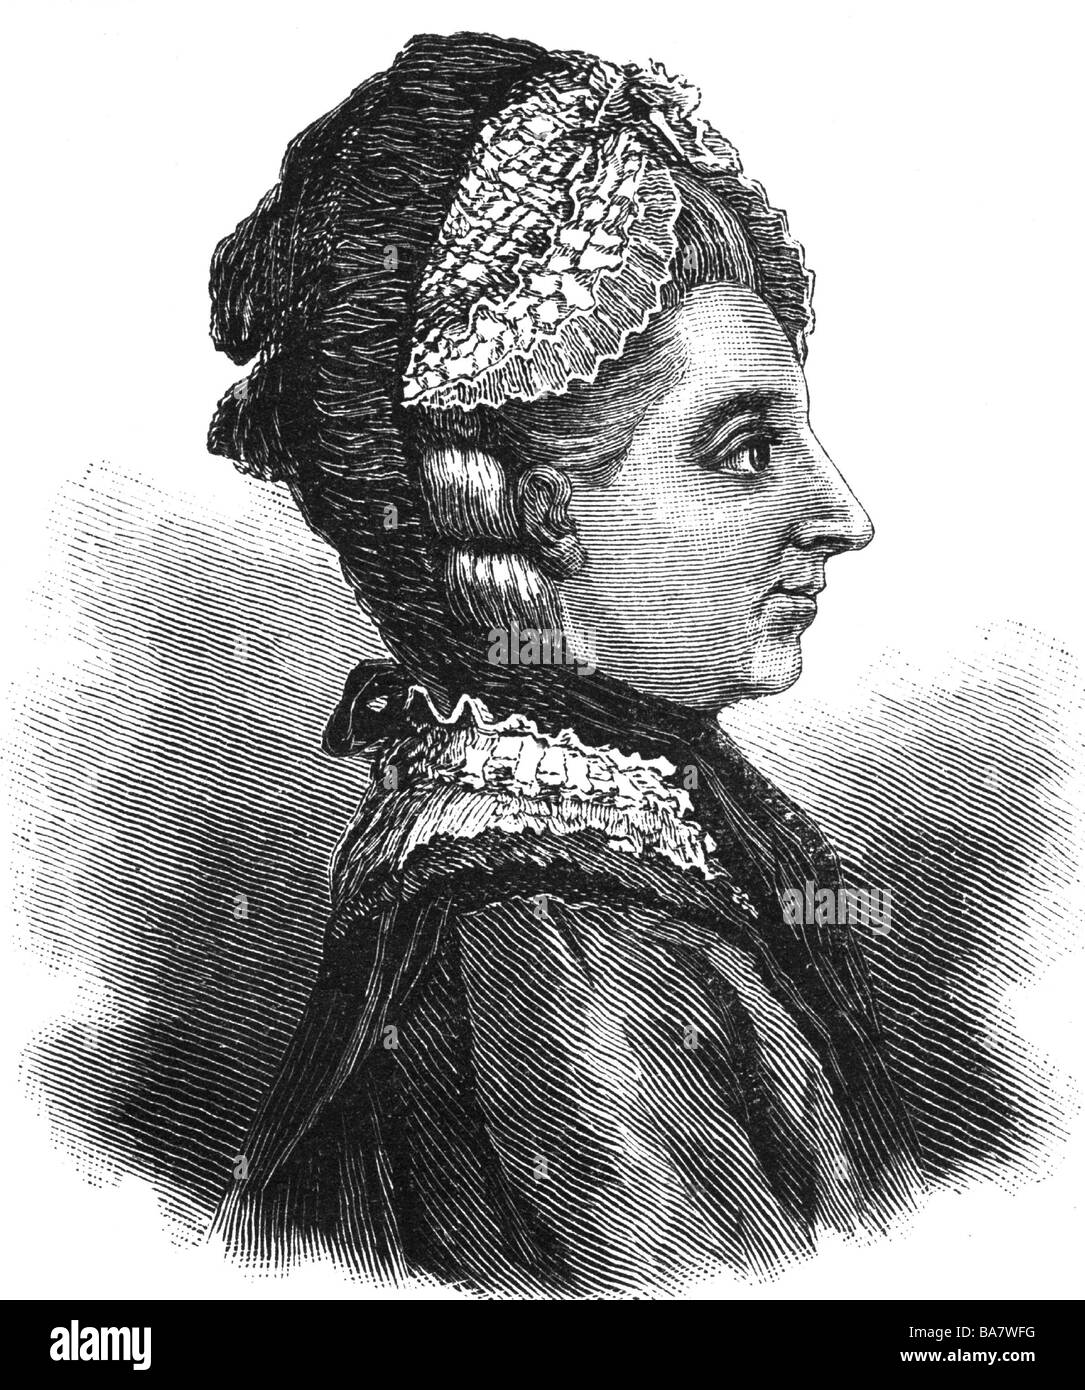 Princess Anna Amalie of Prussia, 9.11.1723 - 30.3.1787, Abbess of Quedlinburg since 1755, portrait, side view, wood engraving, 19th century, after contemporary image, Stock Photo